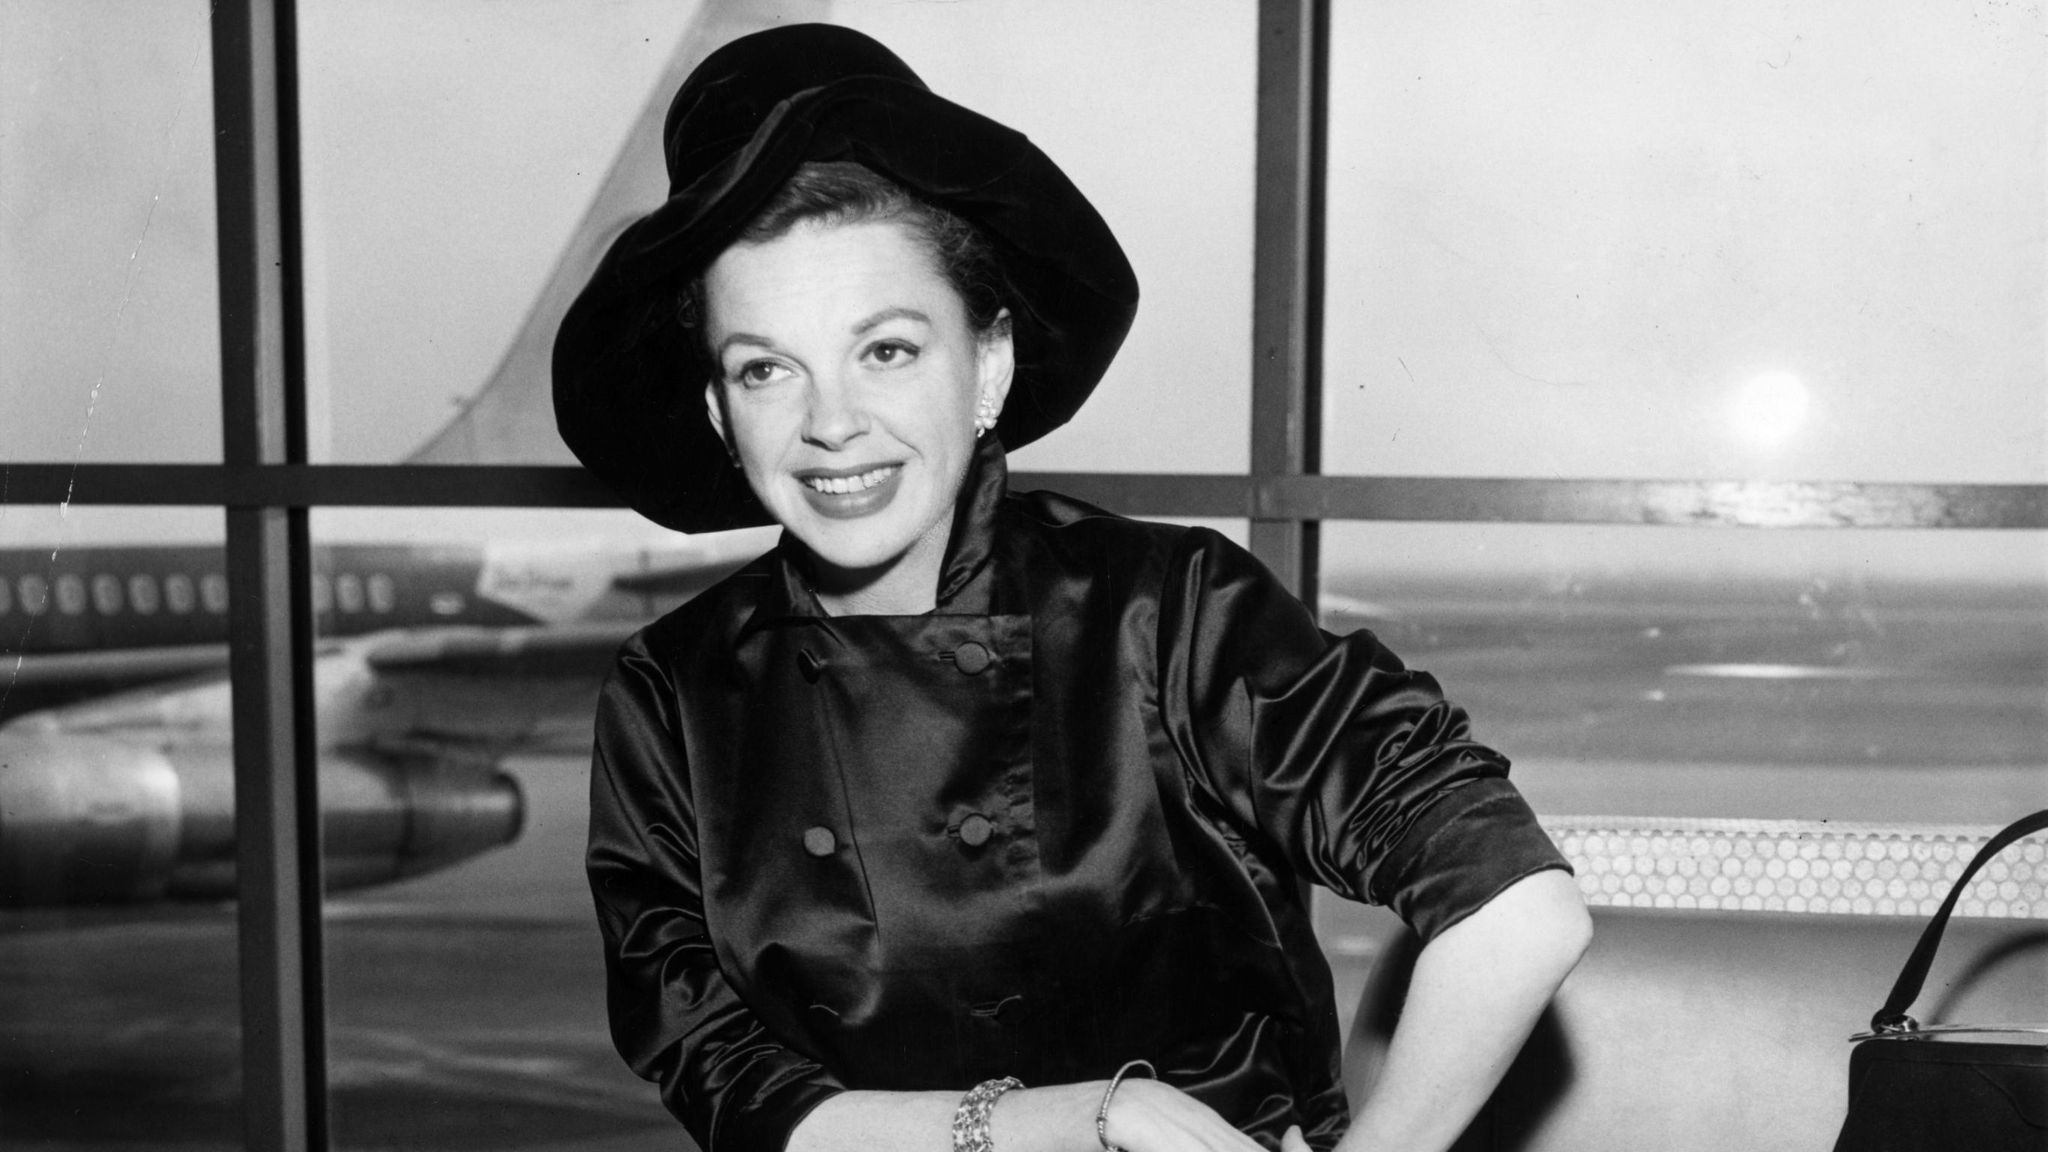 circa 1955: Singer and film star, Judy Garland (1922 - 1969) at an airport. (Photo by Keystone/Getty Images)